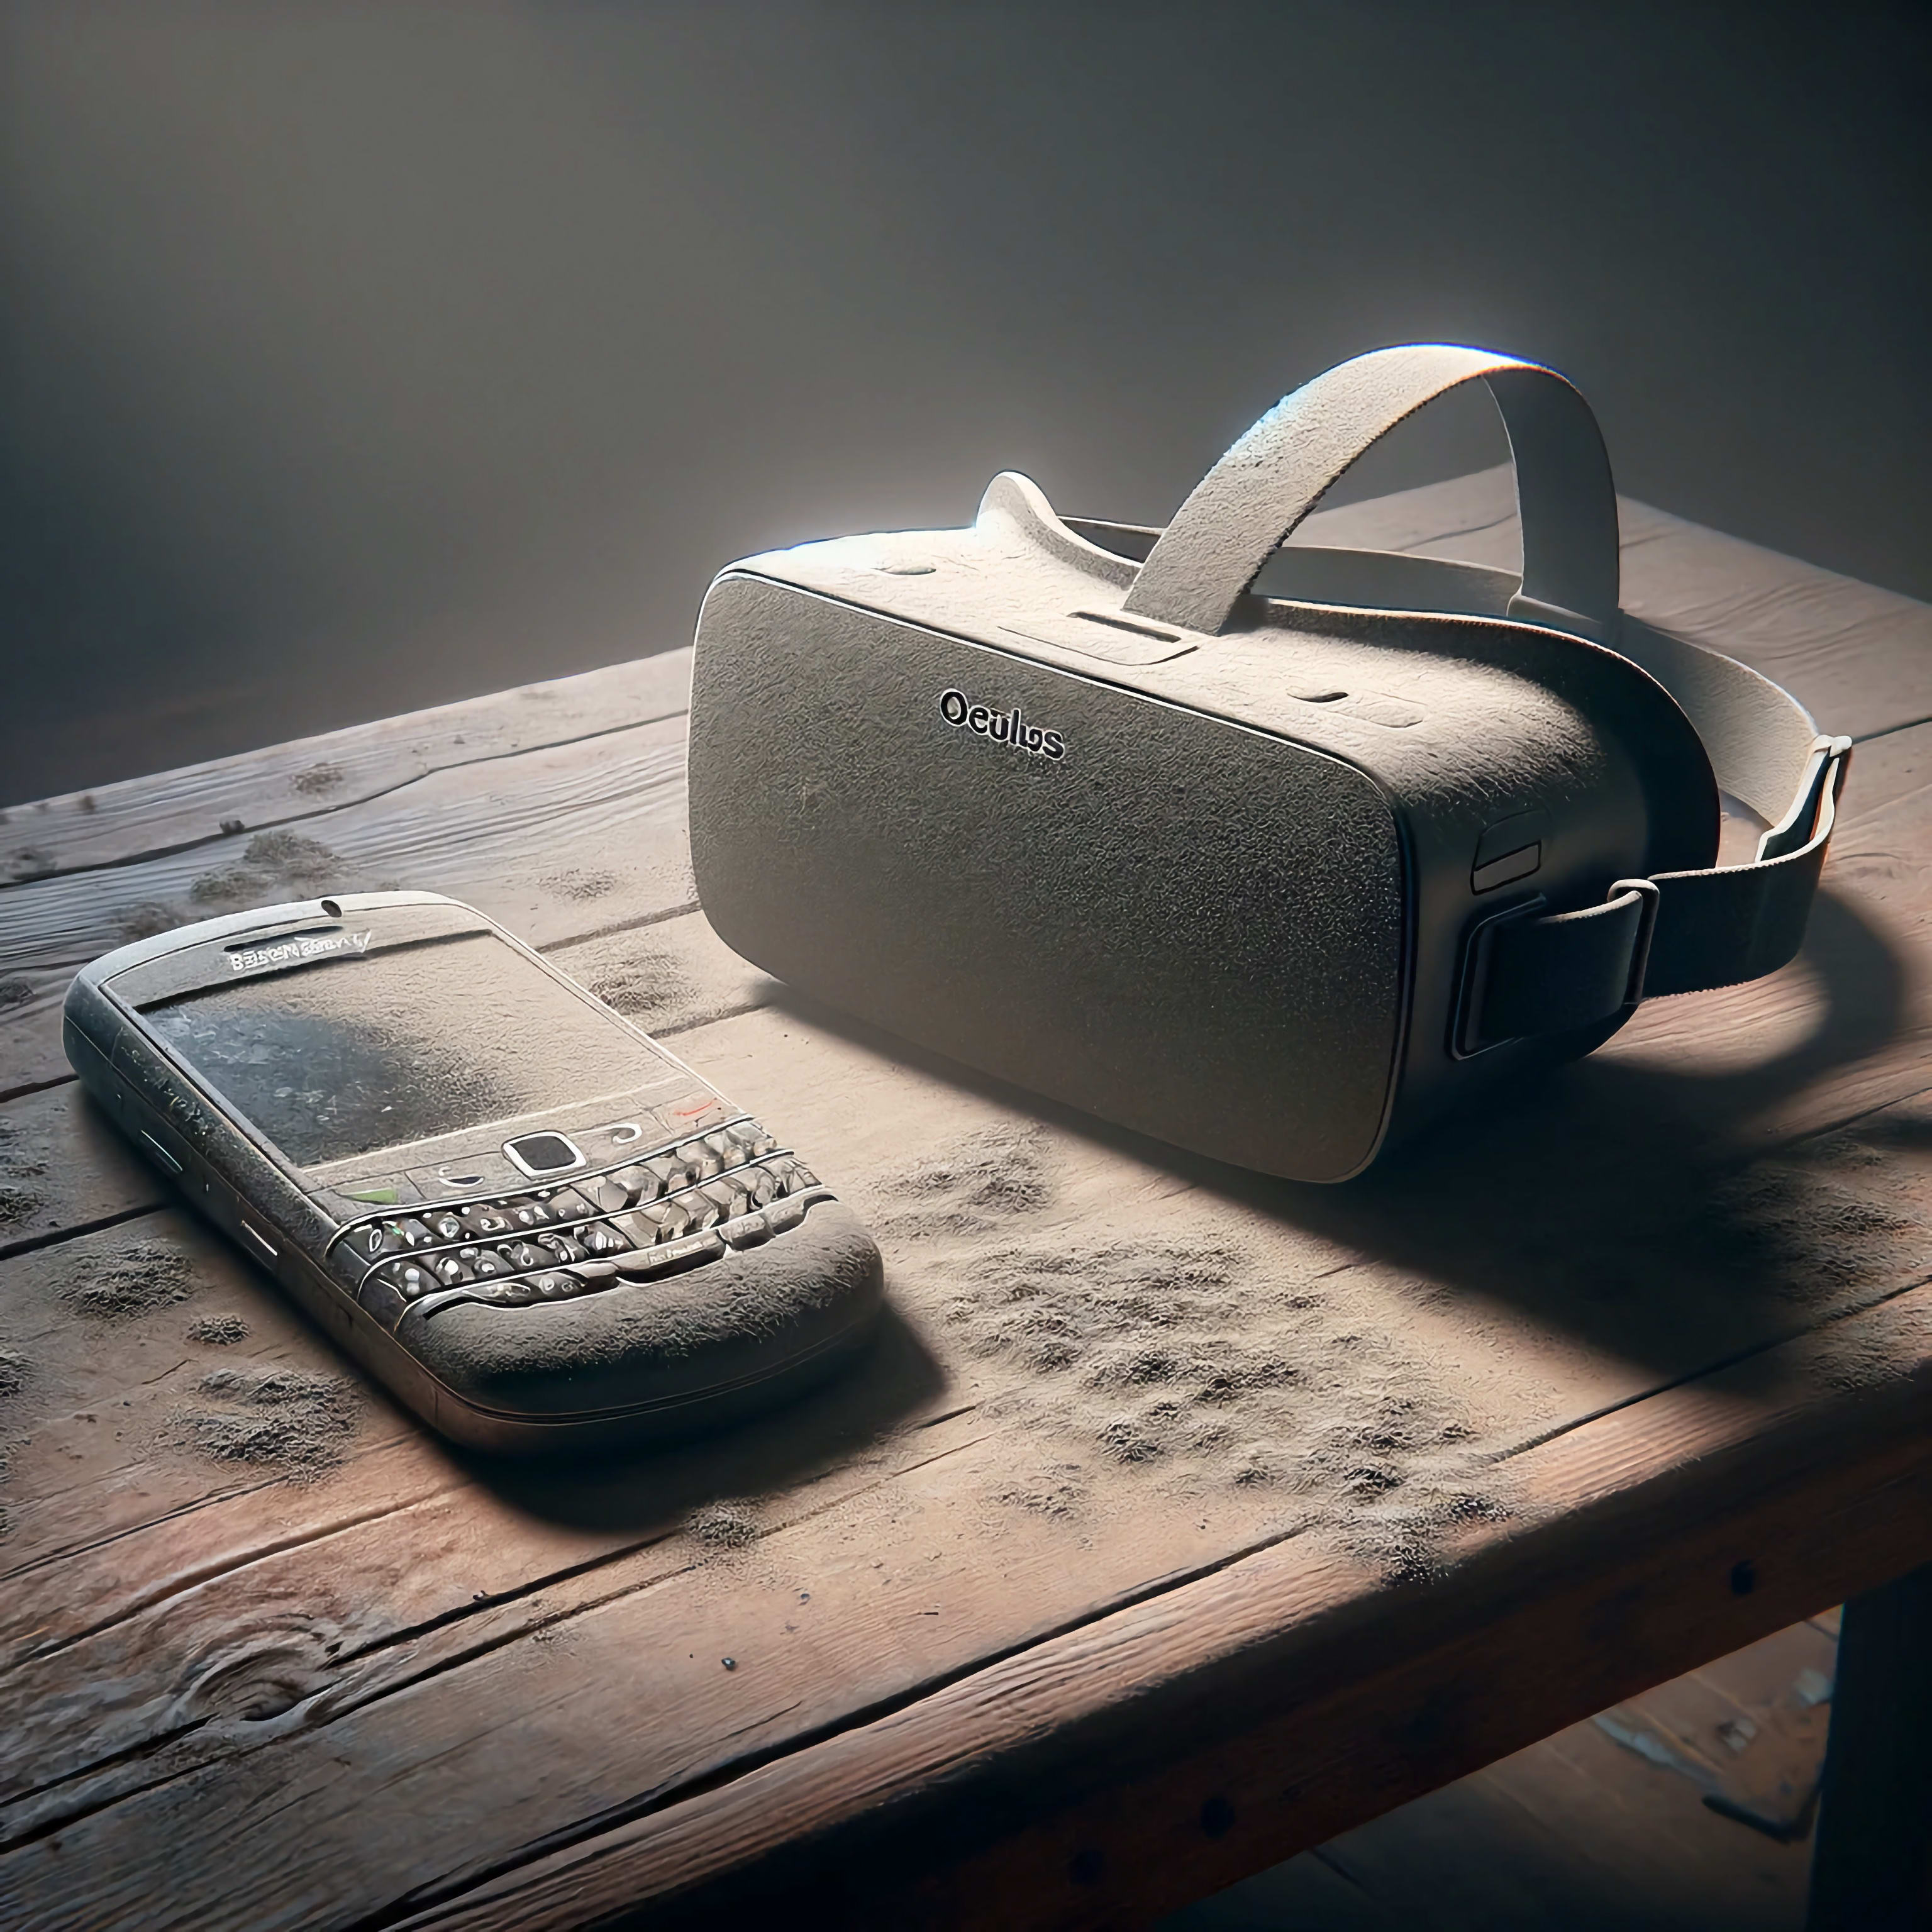 Blackberry & Oculus VR collecting dust